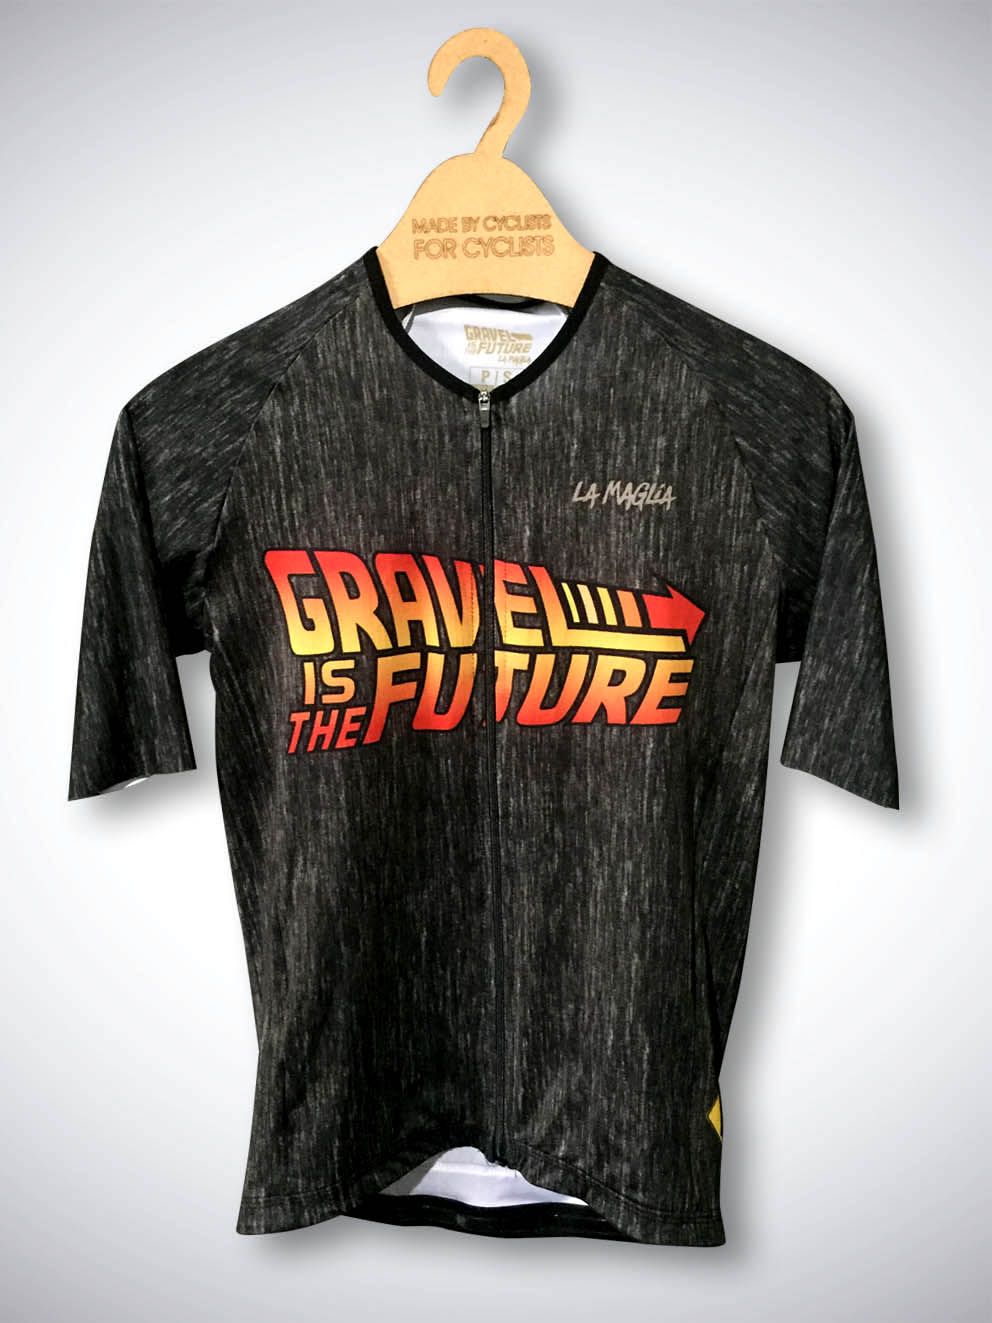 Gravel is the future Jersey